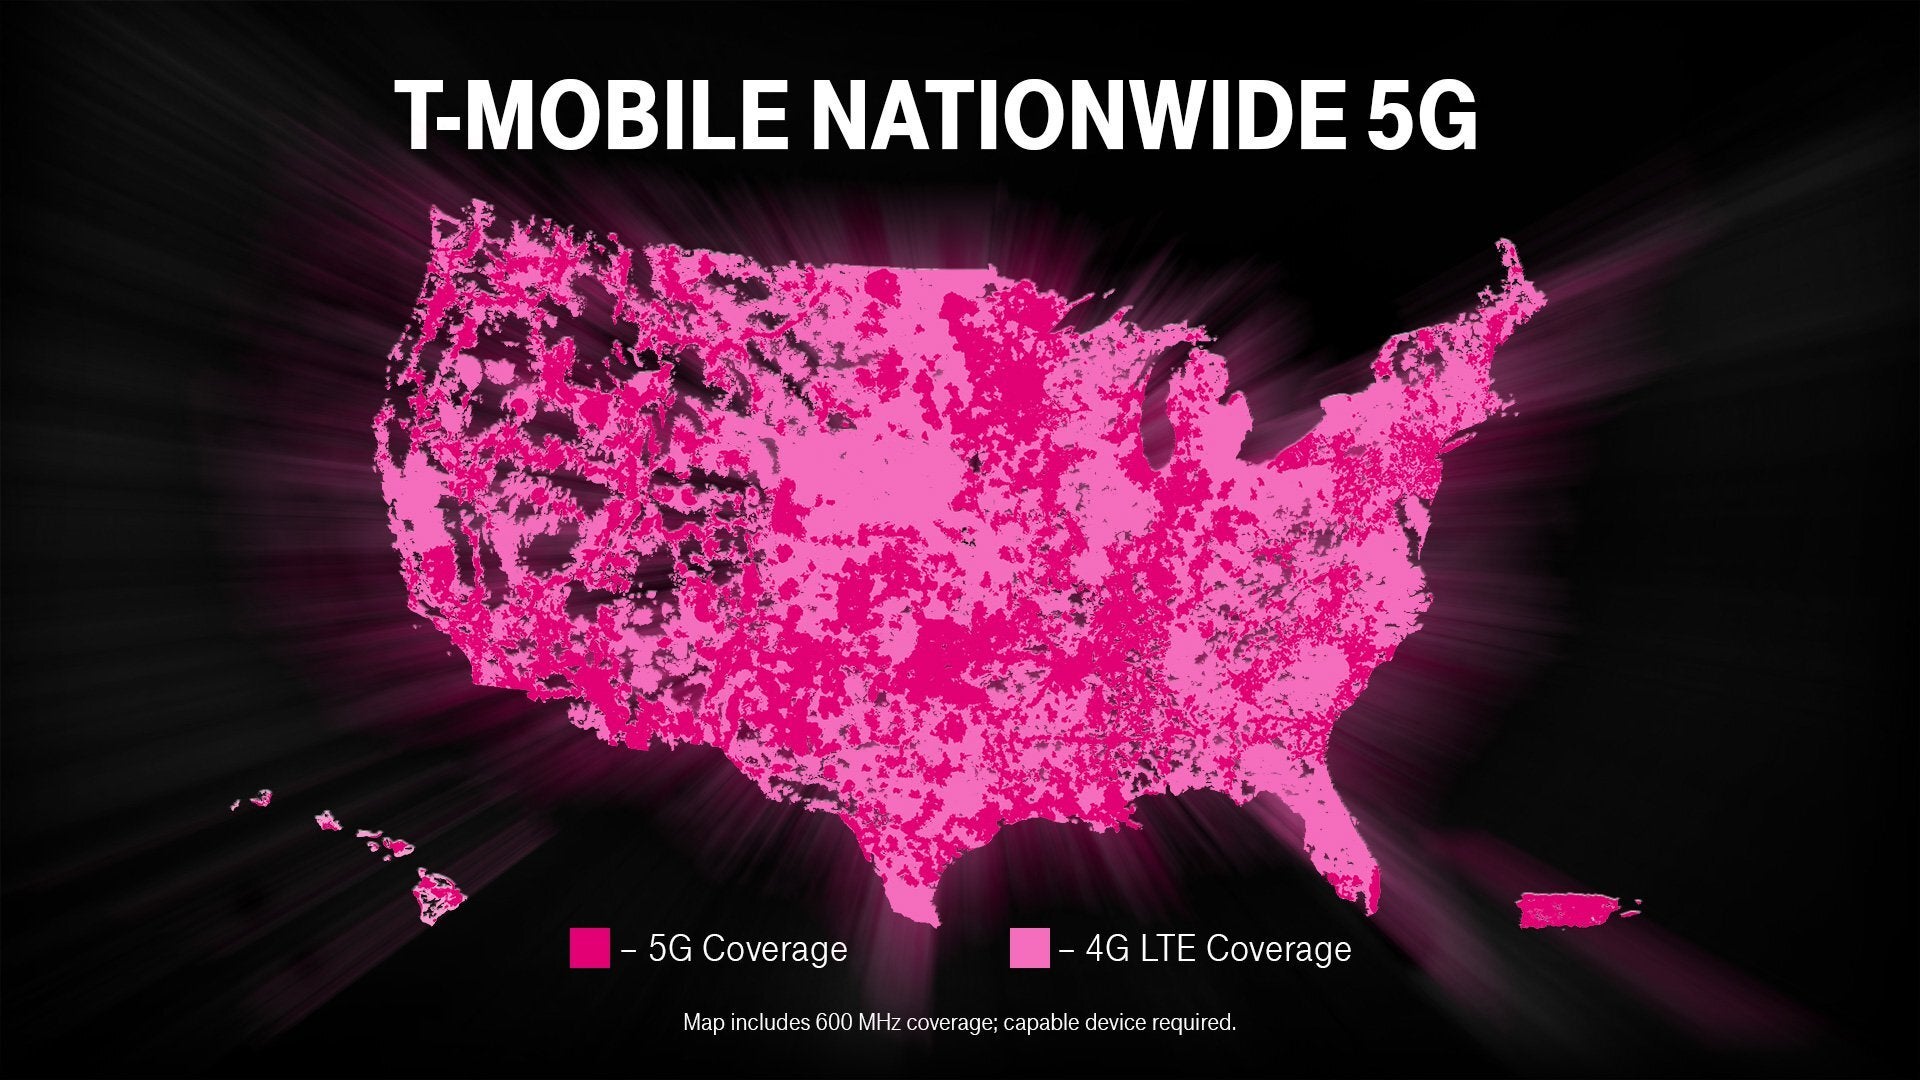 T-Mobile turns on its nationwide 5G network today - T-Mobile launches its 5G nationwide network, but you can't use it until Friday